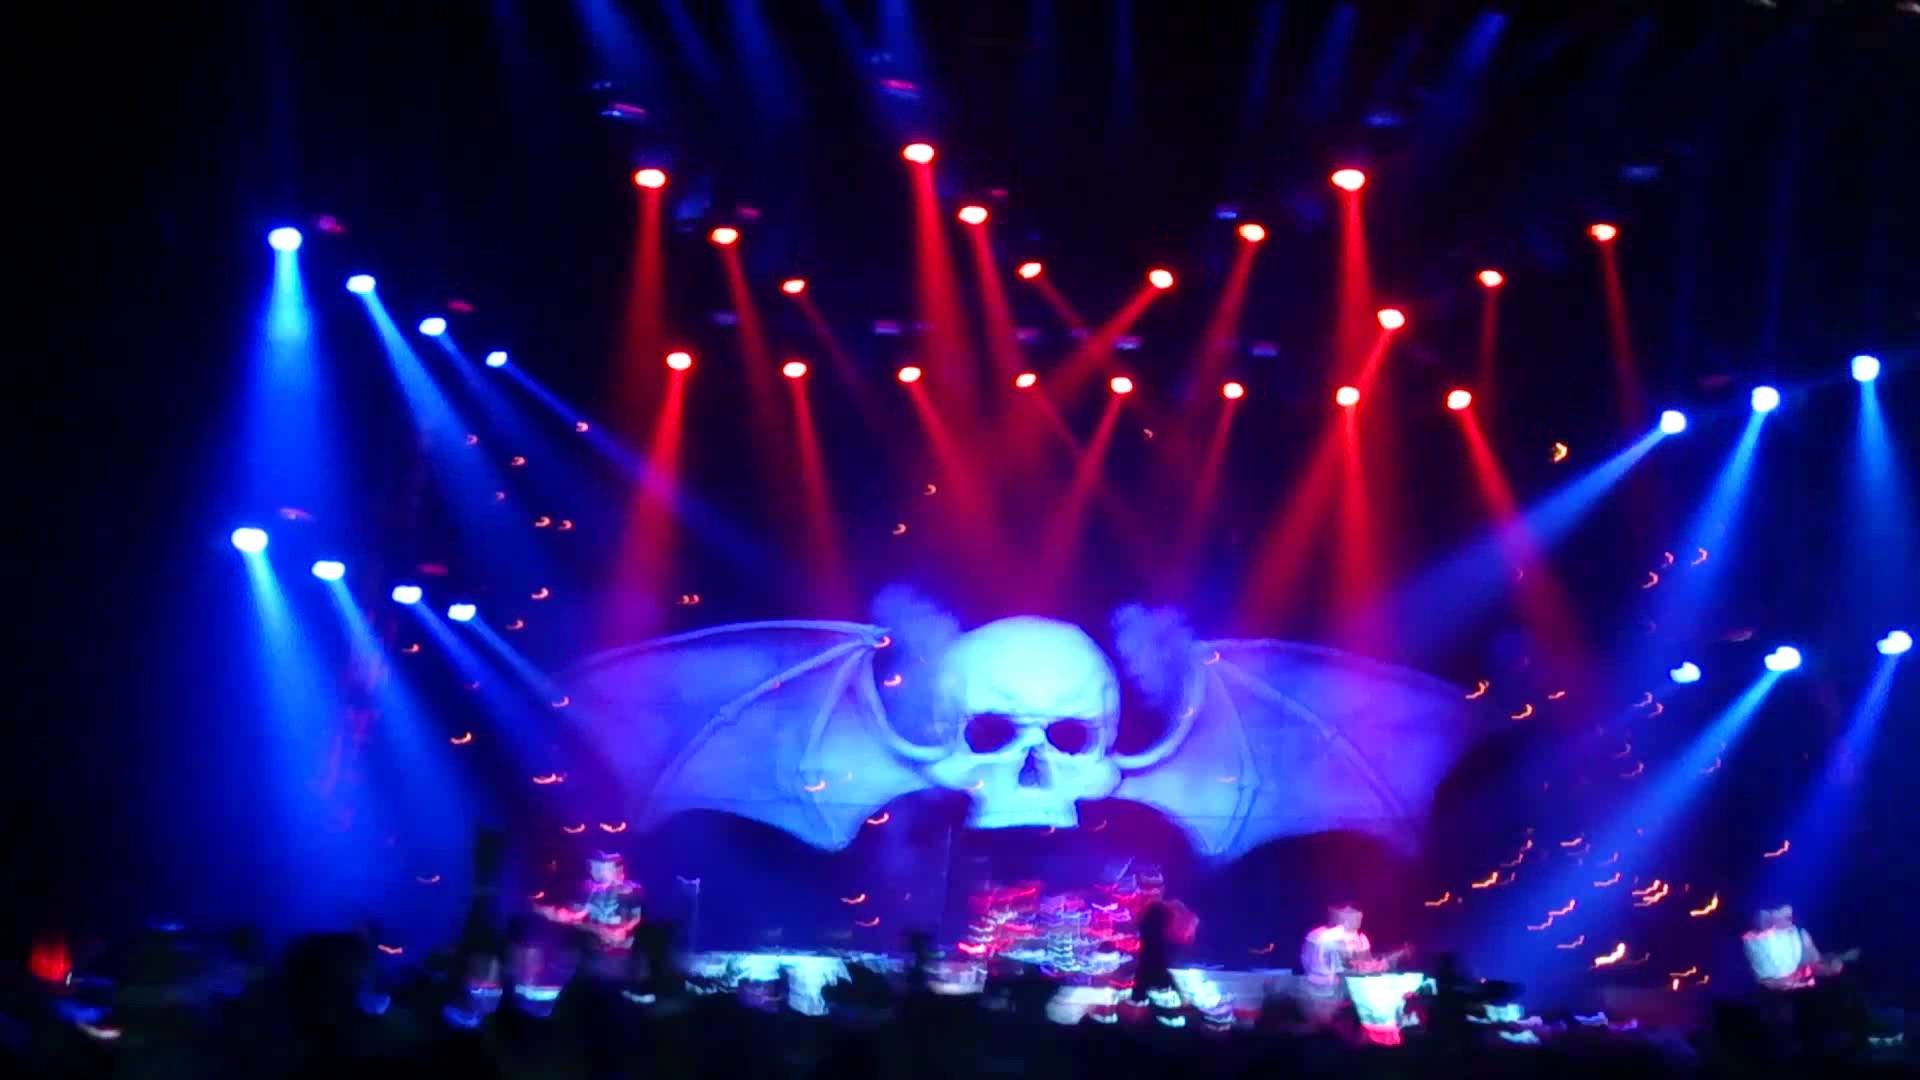 A7X 'Welcome to the family' Deathbat stage